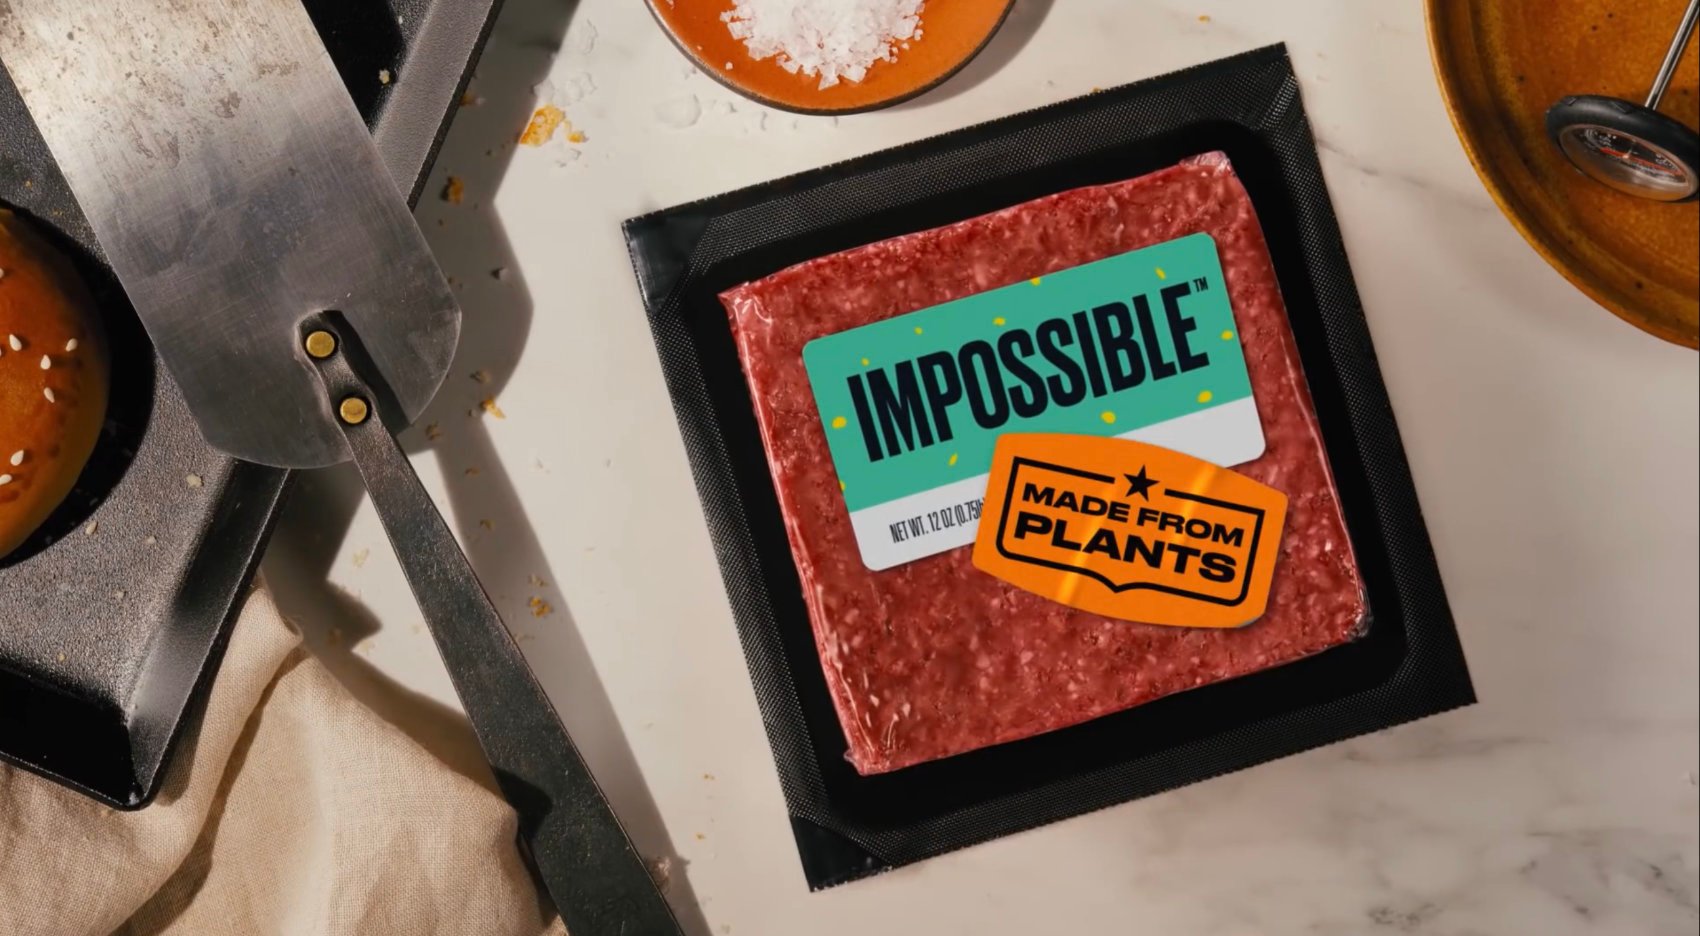 Impossible Meat